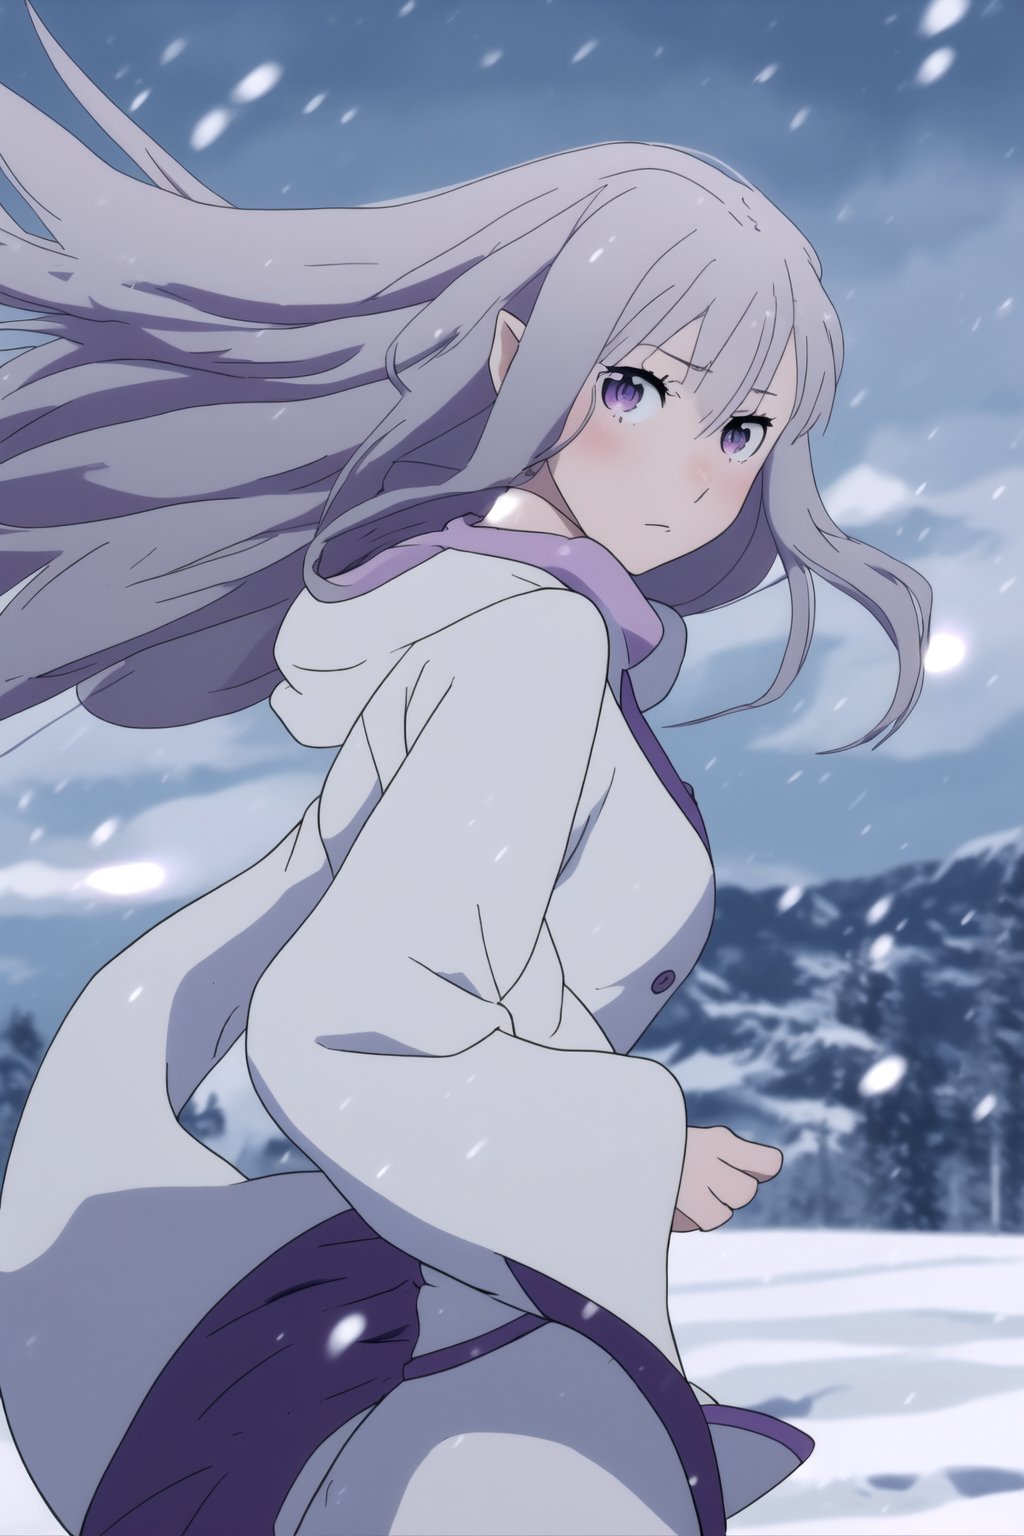 anime wallpaper, innocent girl, cute, tender, snowy background, hair moving in the wind, tender look, body facing forward, left hand arranging hair in the wind, right hand behind the back.